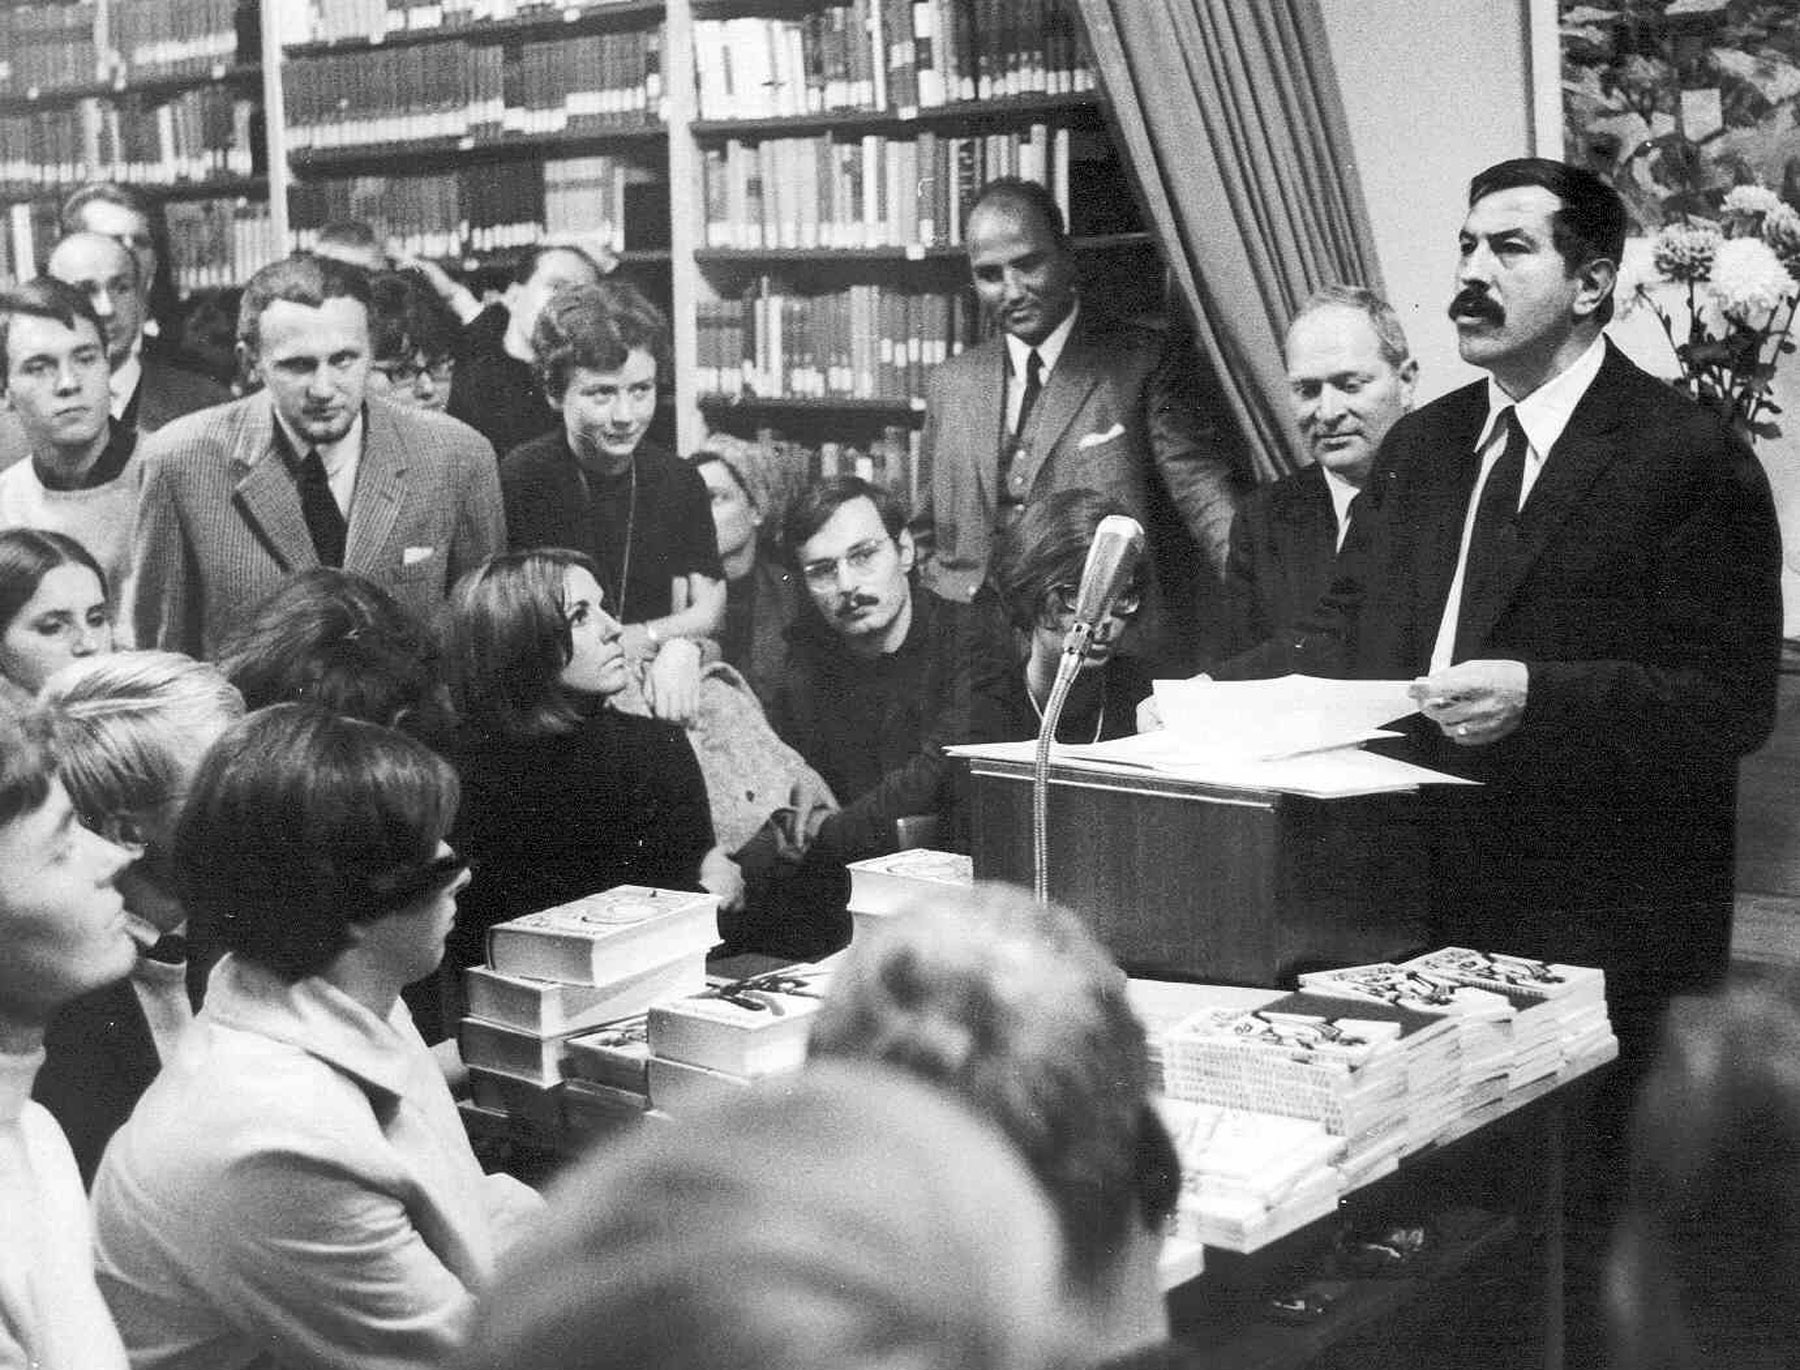 GÃ¼nter Grass, 1999 recipient of Nobel Prize in Literature, reading at JYM in 1966